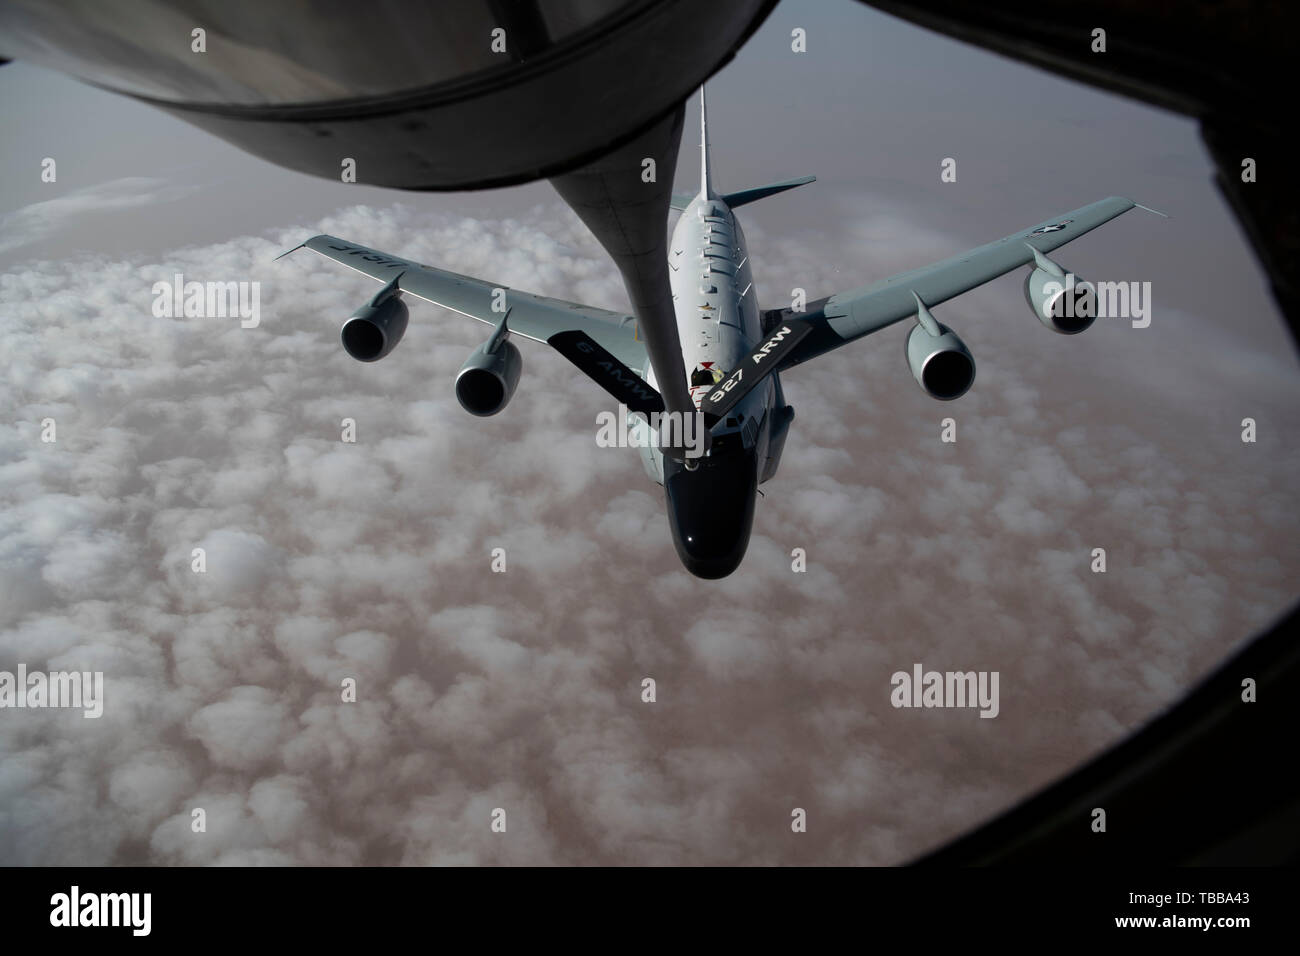 A U.S. Air Force RC-135 Rivet Joint receives fuel from a KC-135 Stratotanker during a mission within the U.S. Air Force Central Command Area of Responsibility May 26, 2019. The Rivet Joint supports theater and national level consumers with near real time on-screen intelligence collection, analysis and dissemination capabilities.  (U.S. Air Force photo by Master Sgt. Russ Scalf) Stock Photo